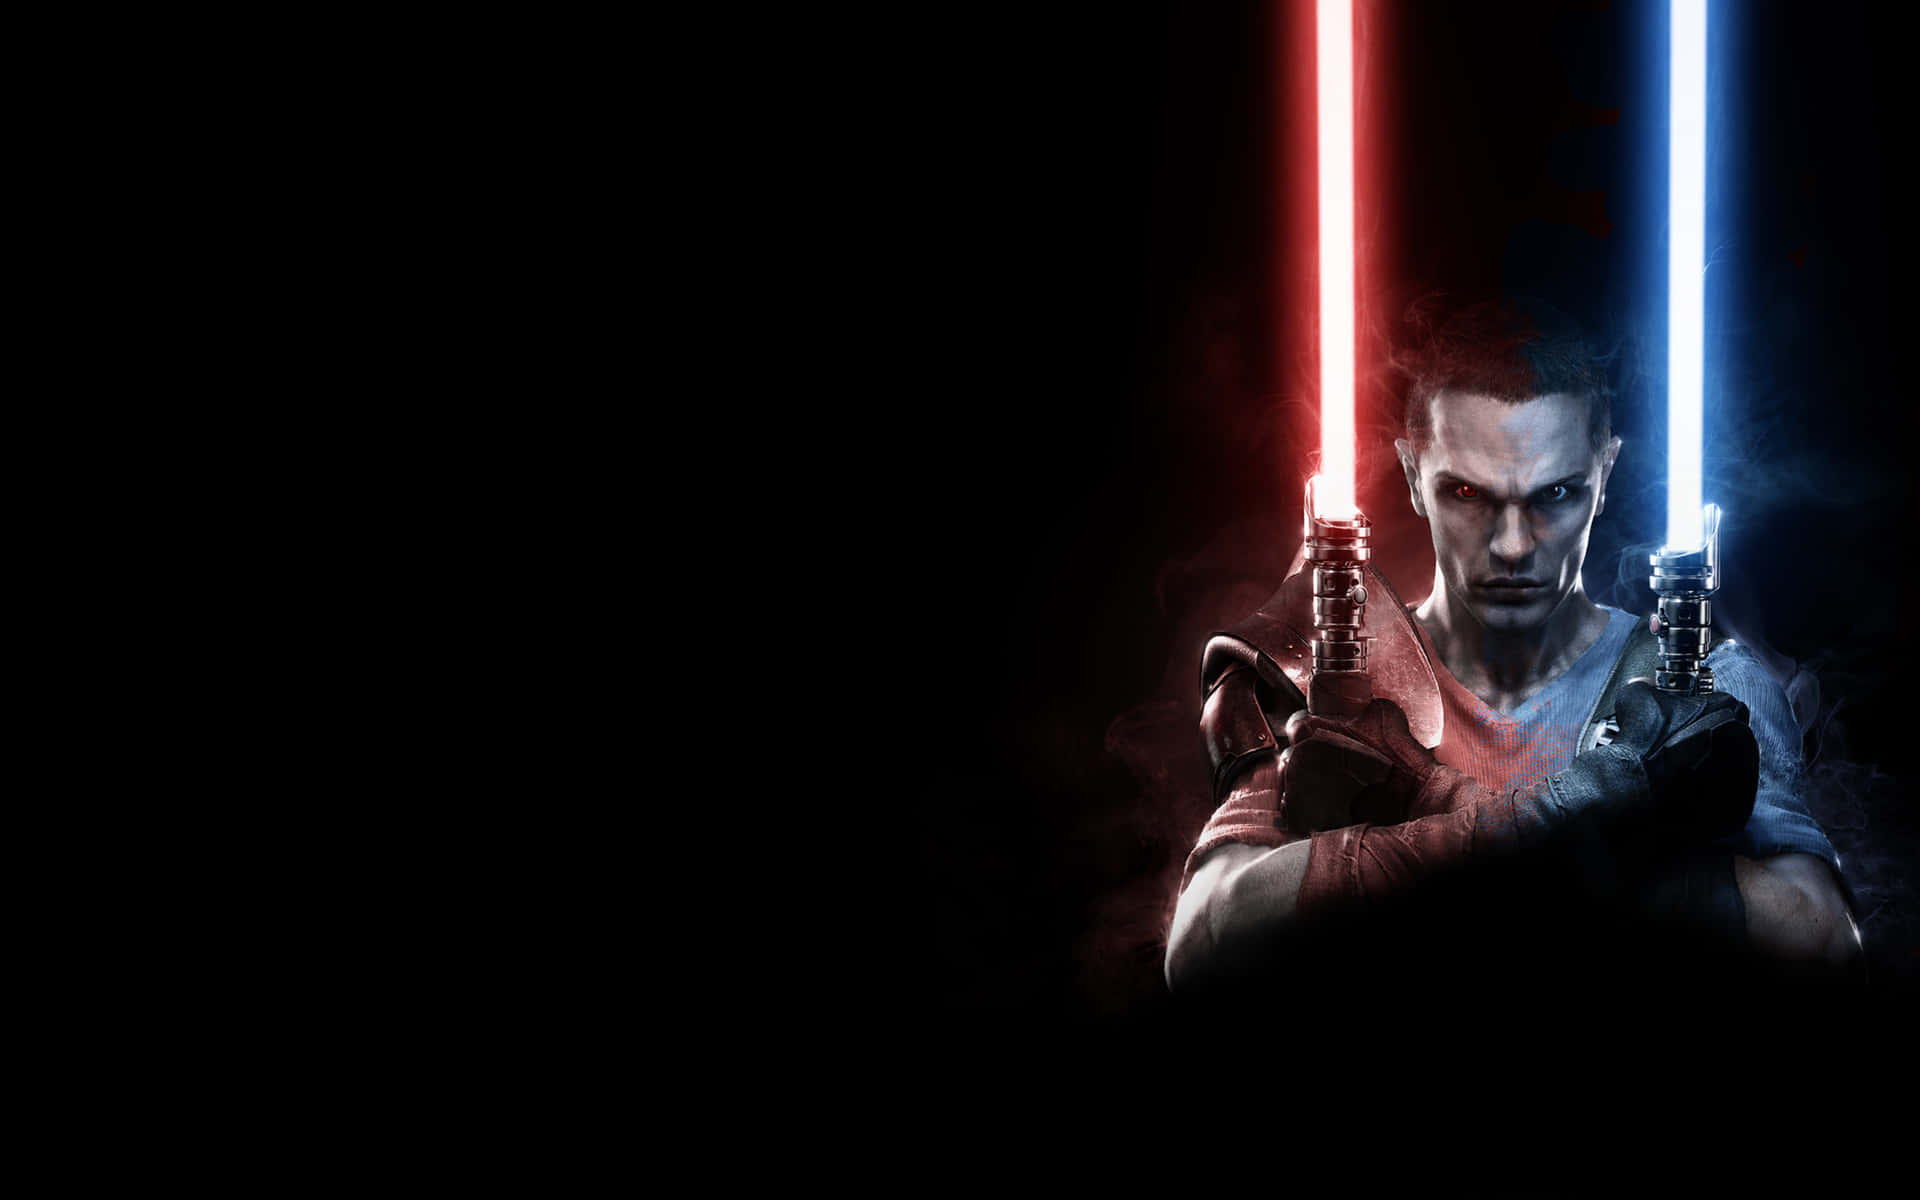 A powerful Jedi stands ready to protect the Force Wallpaper